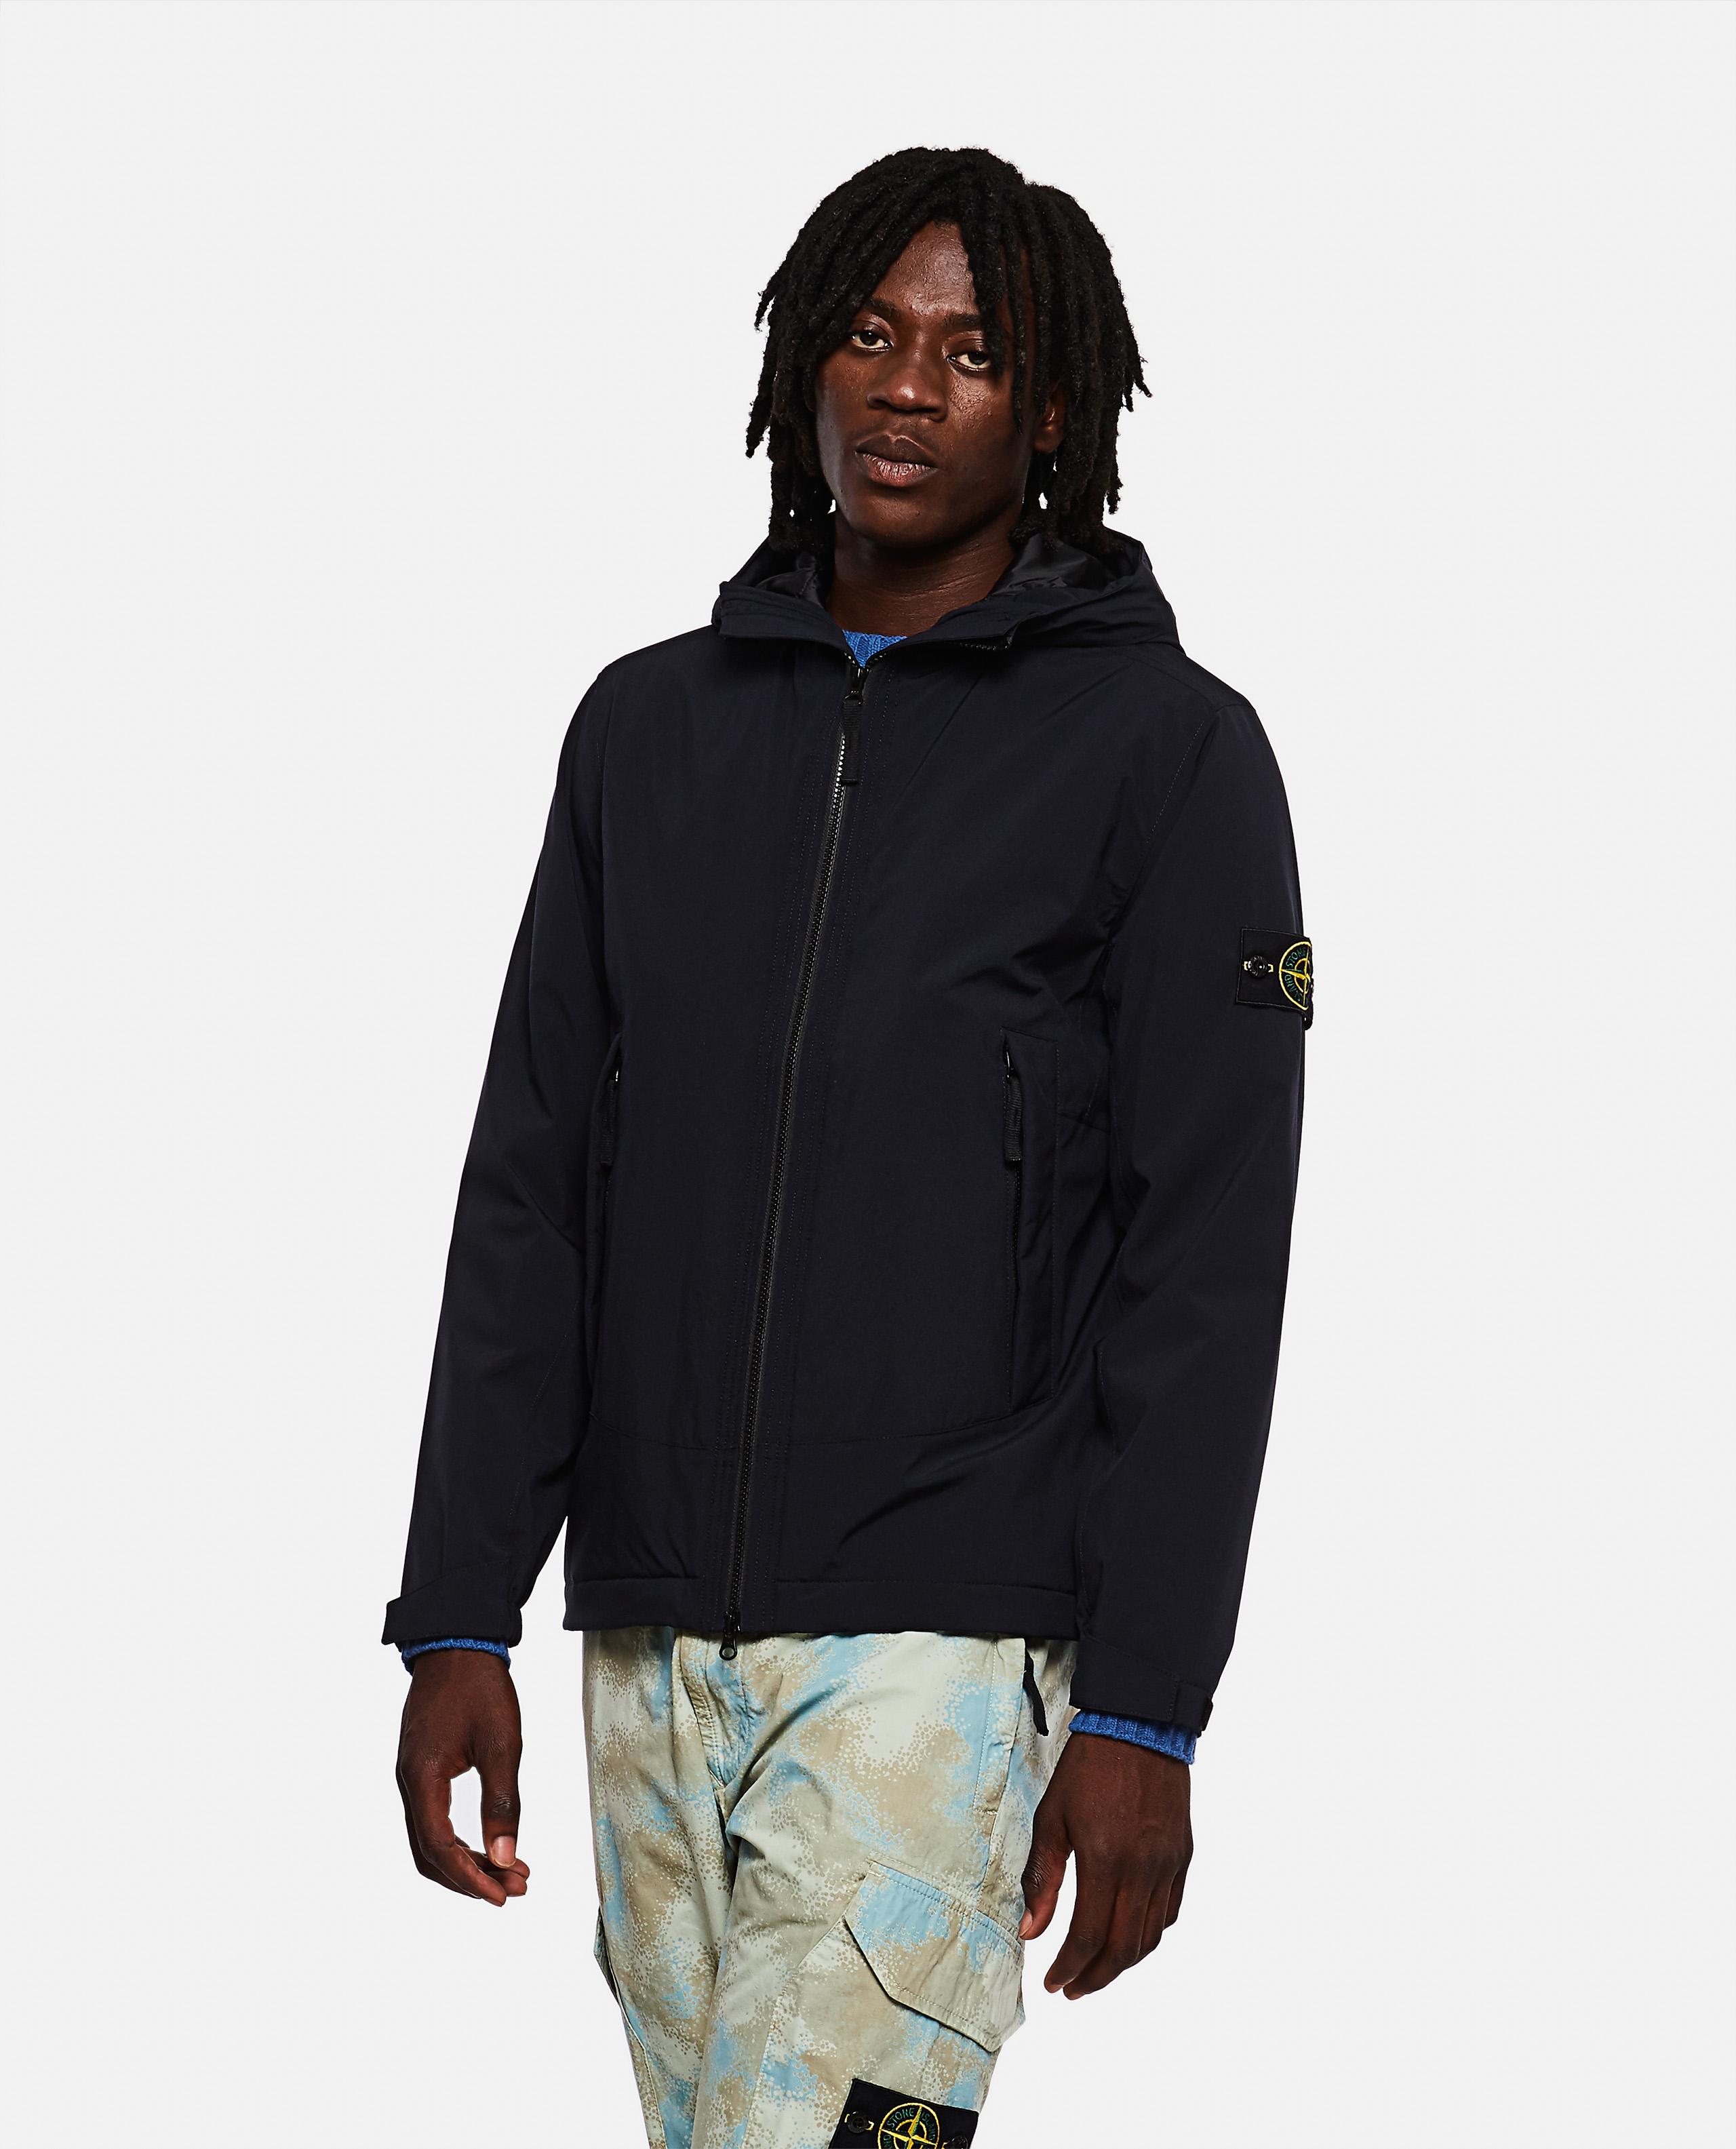 Stone Island Soft Shell-r Jacket With Primaloft Insulation Technology in  Blue (Black) for Men - Lyst